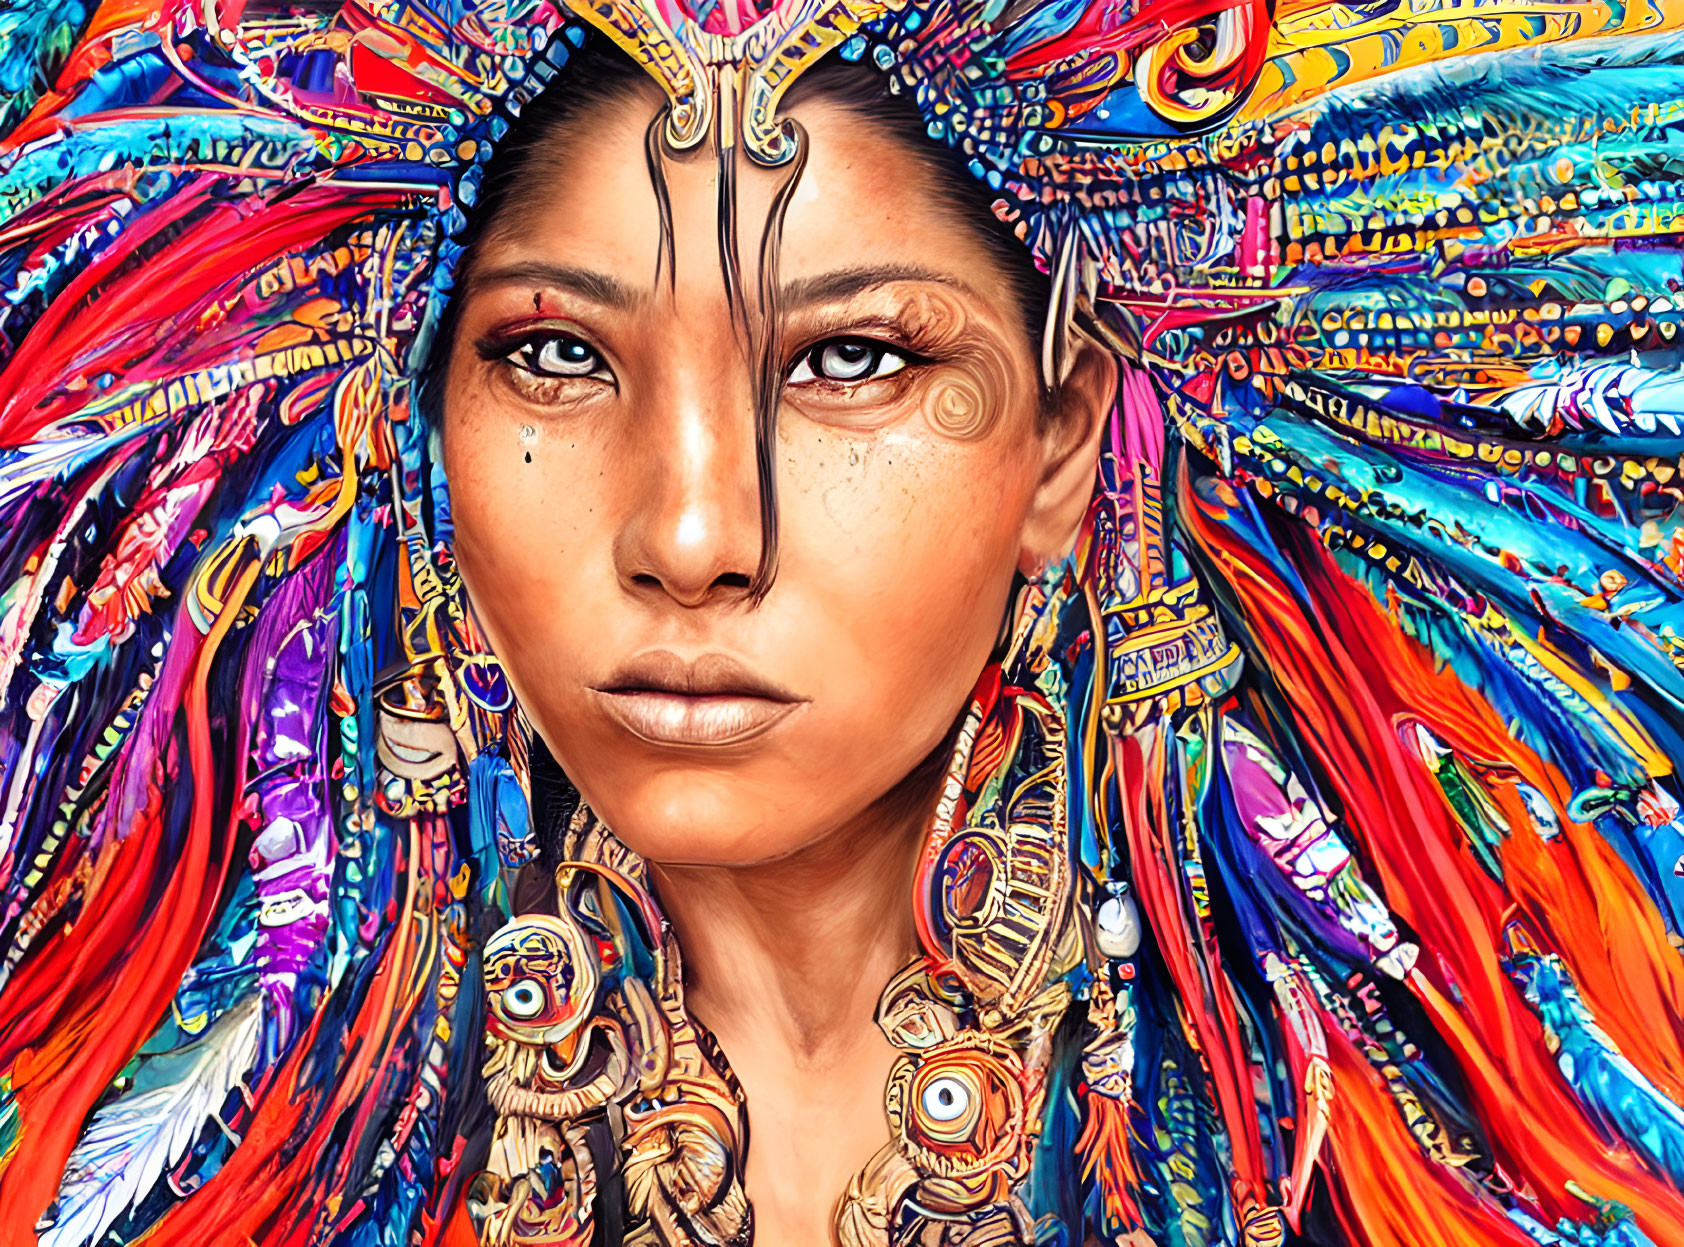 Colorful Portrait of Woman with Intricate Headdress and Markings